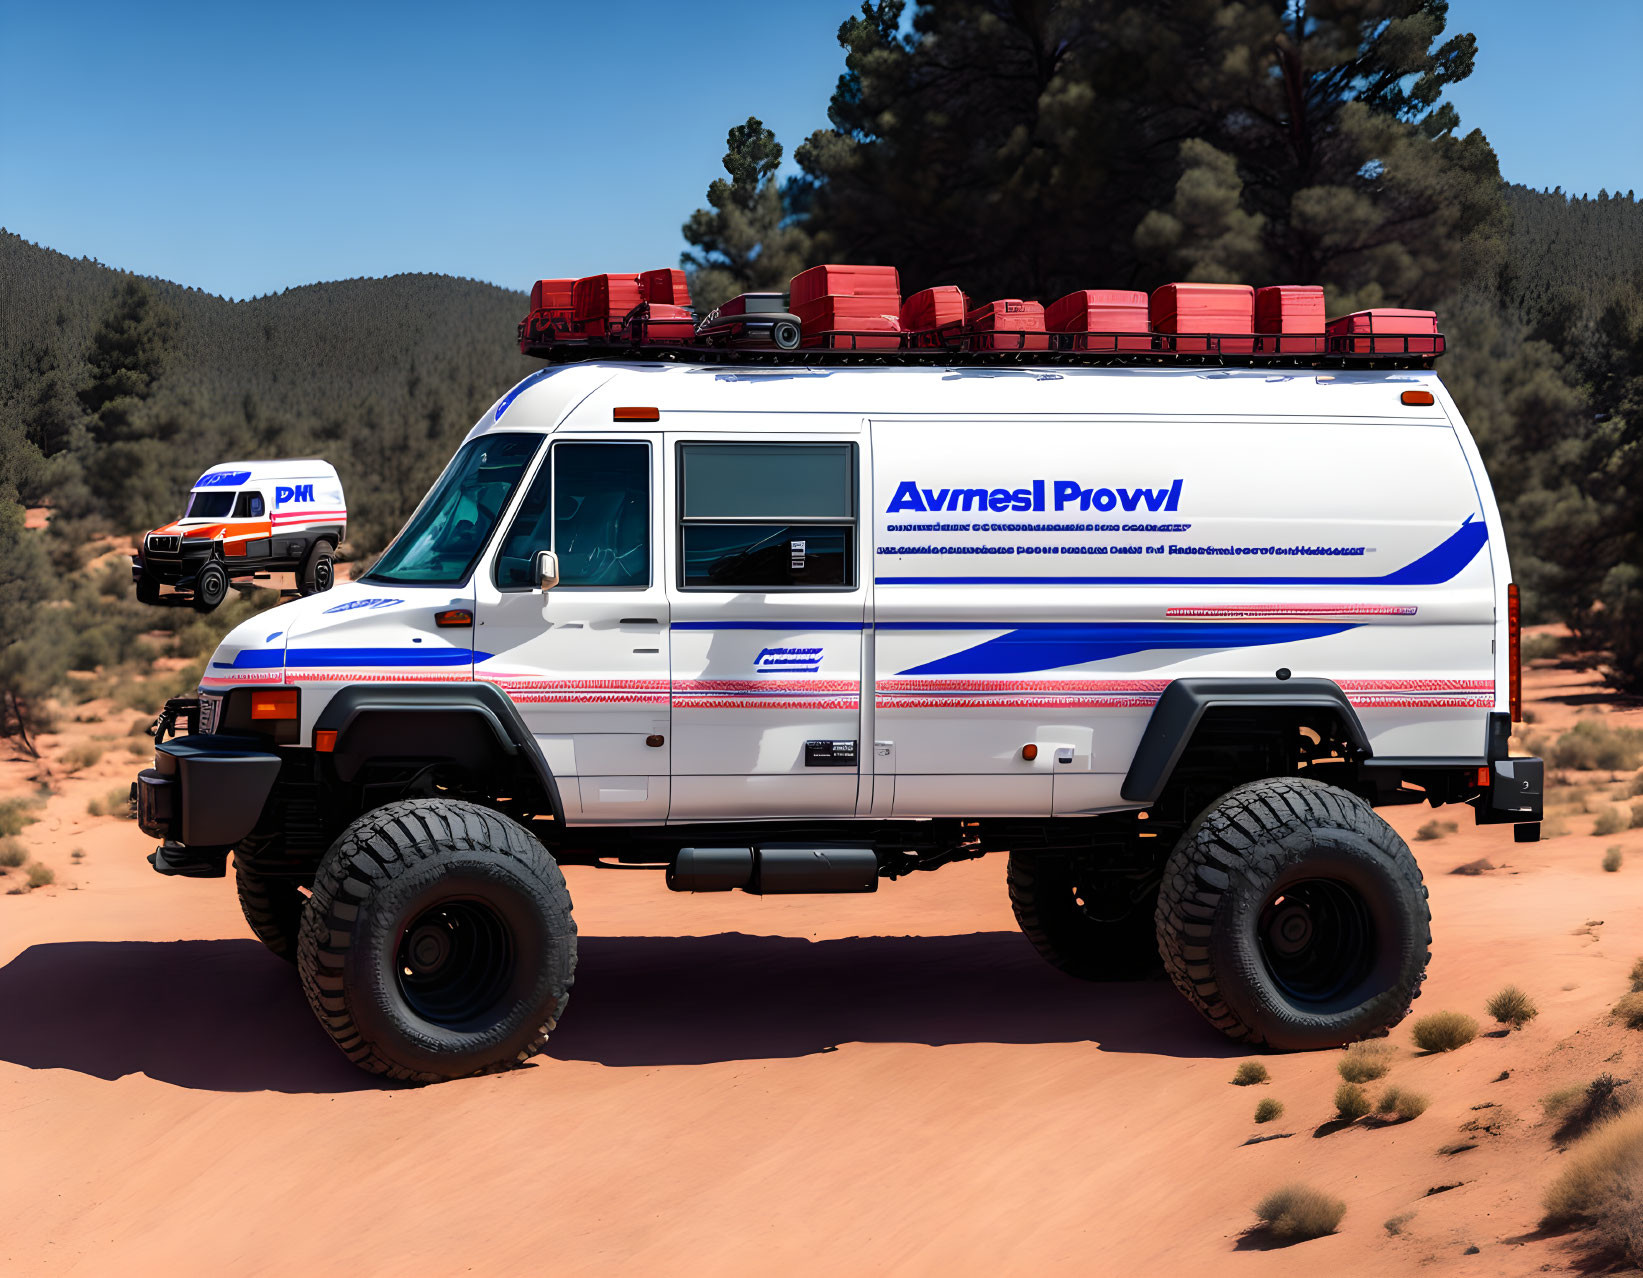 White Off-Road Emergency Vehicle with Red Gas Cans and "Avtimesl Prowl